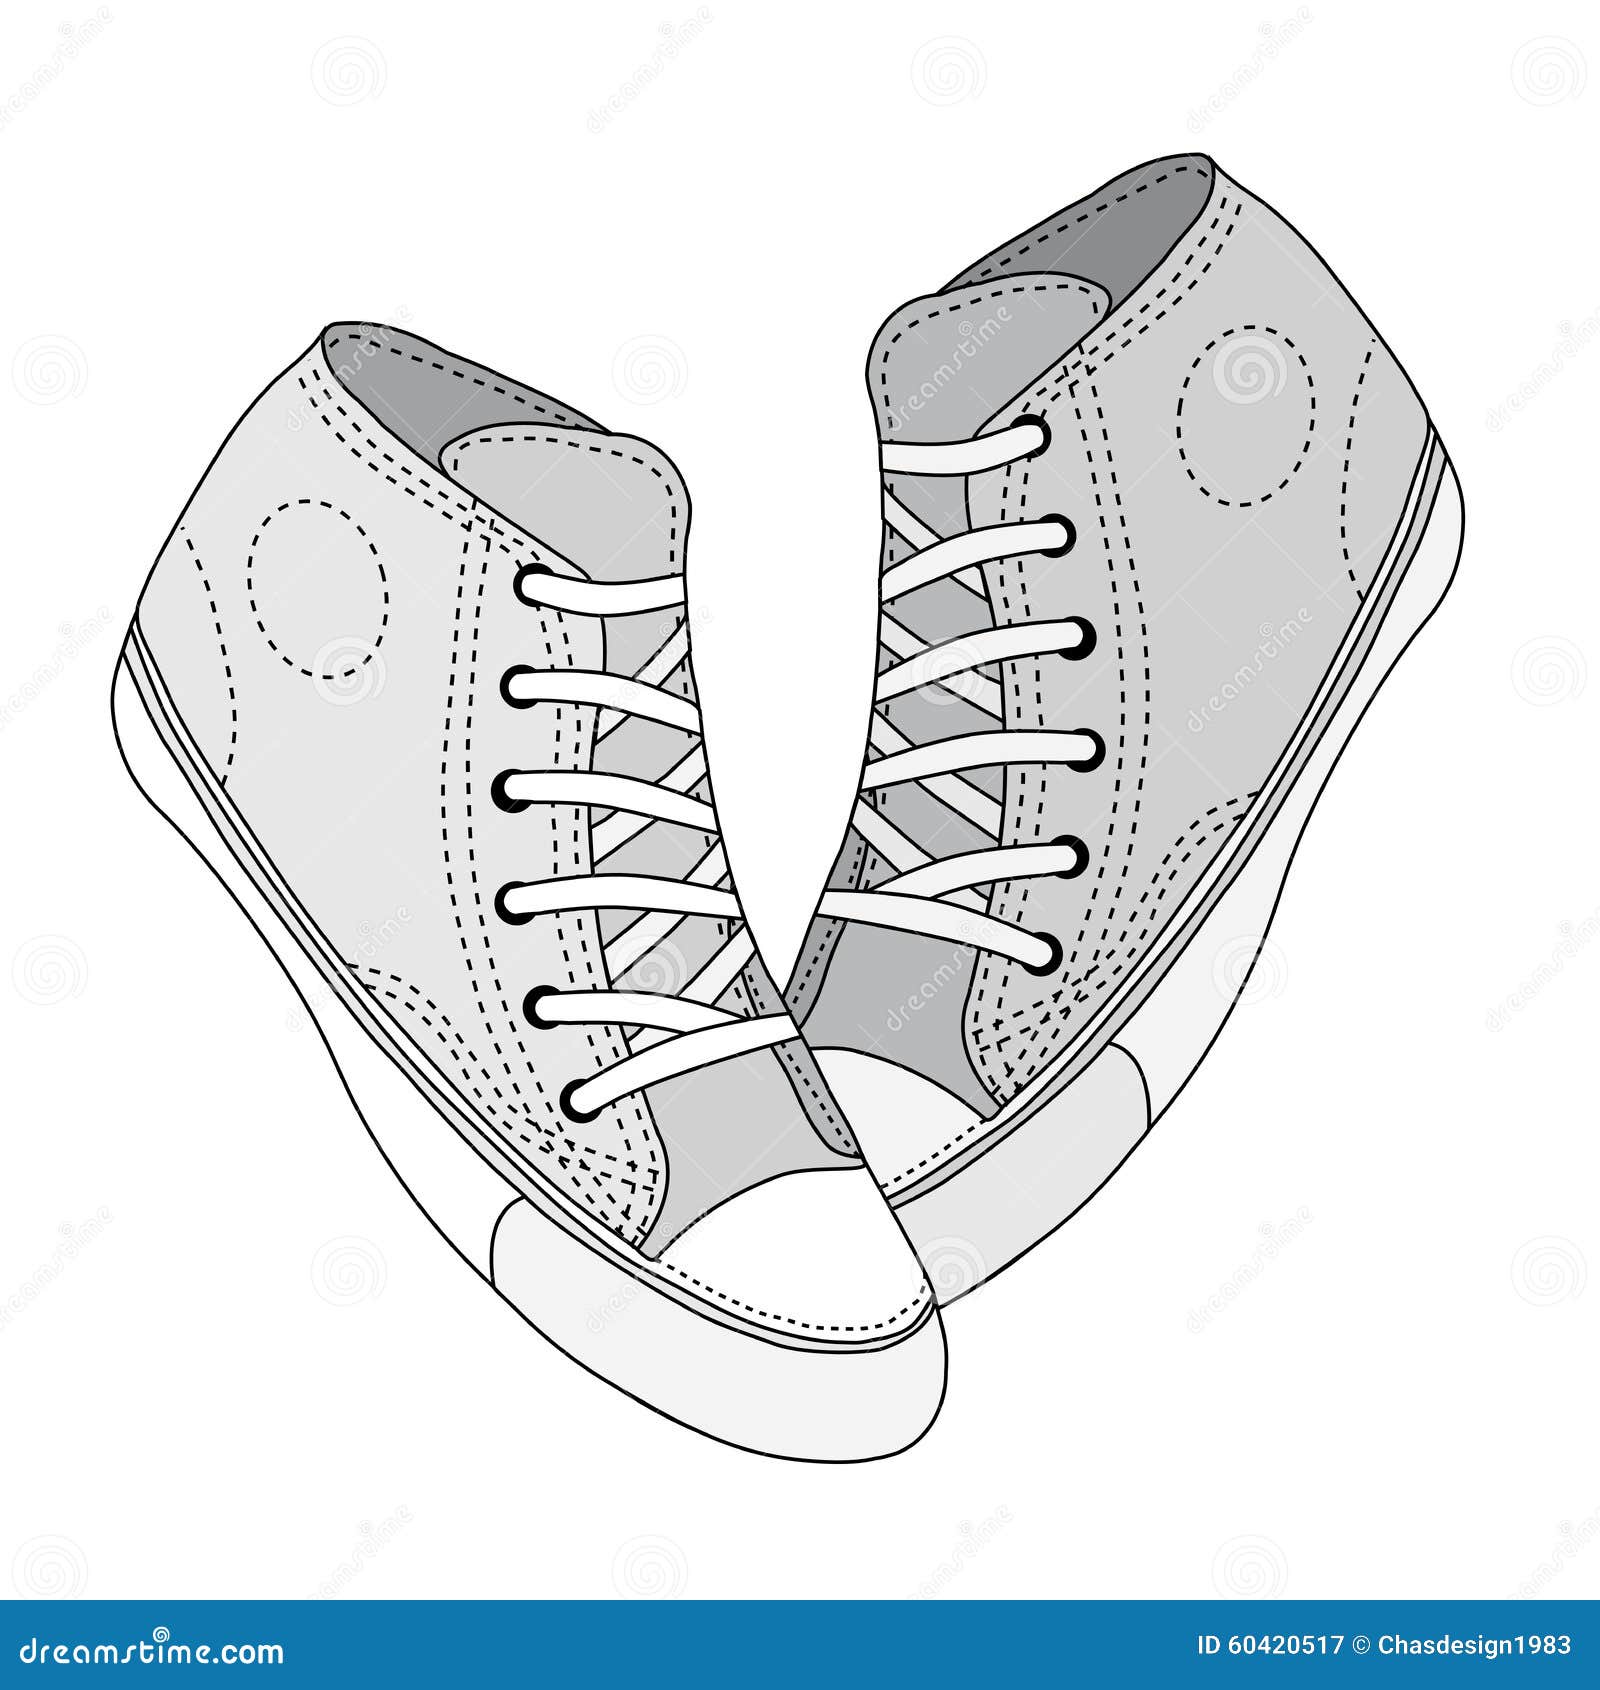 Classic sneaker sketched stock vector. Illustration of fashion - 60420517